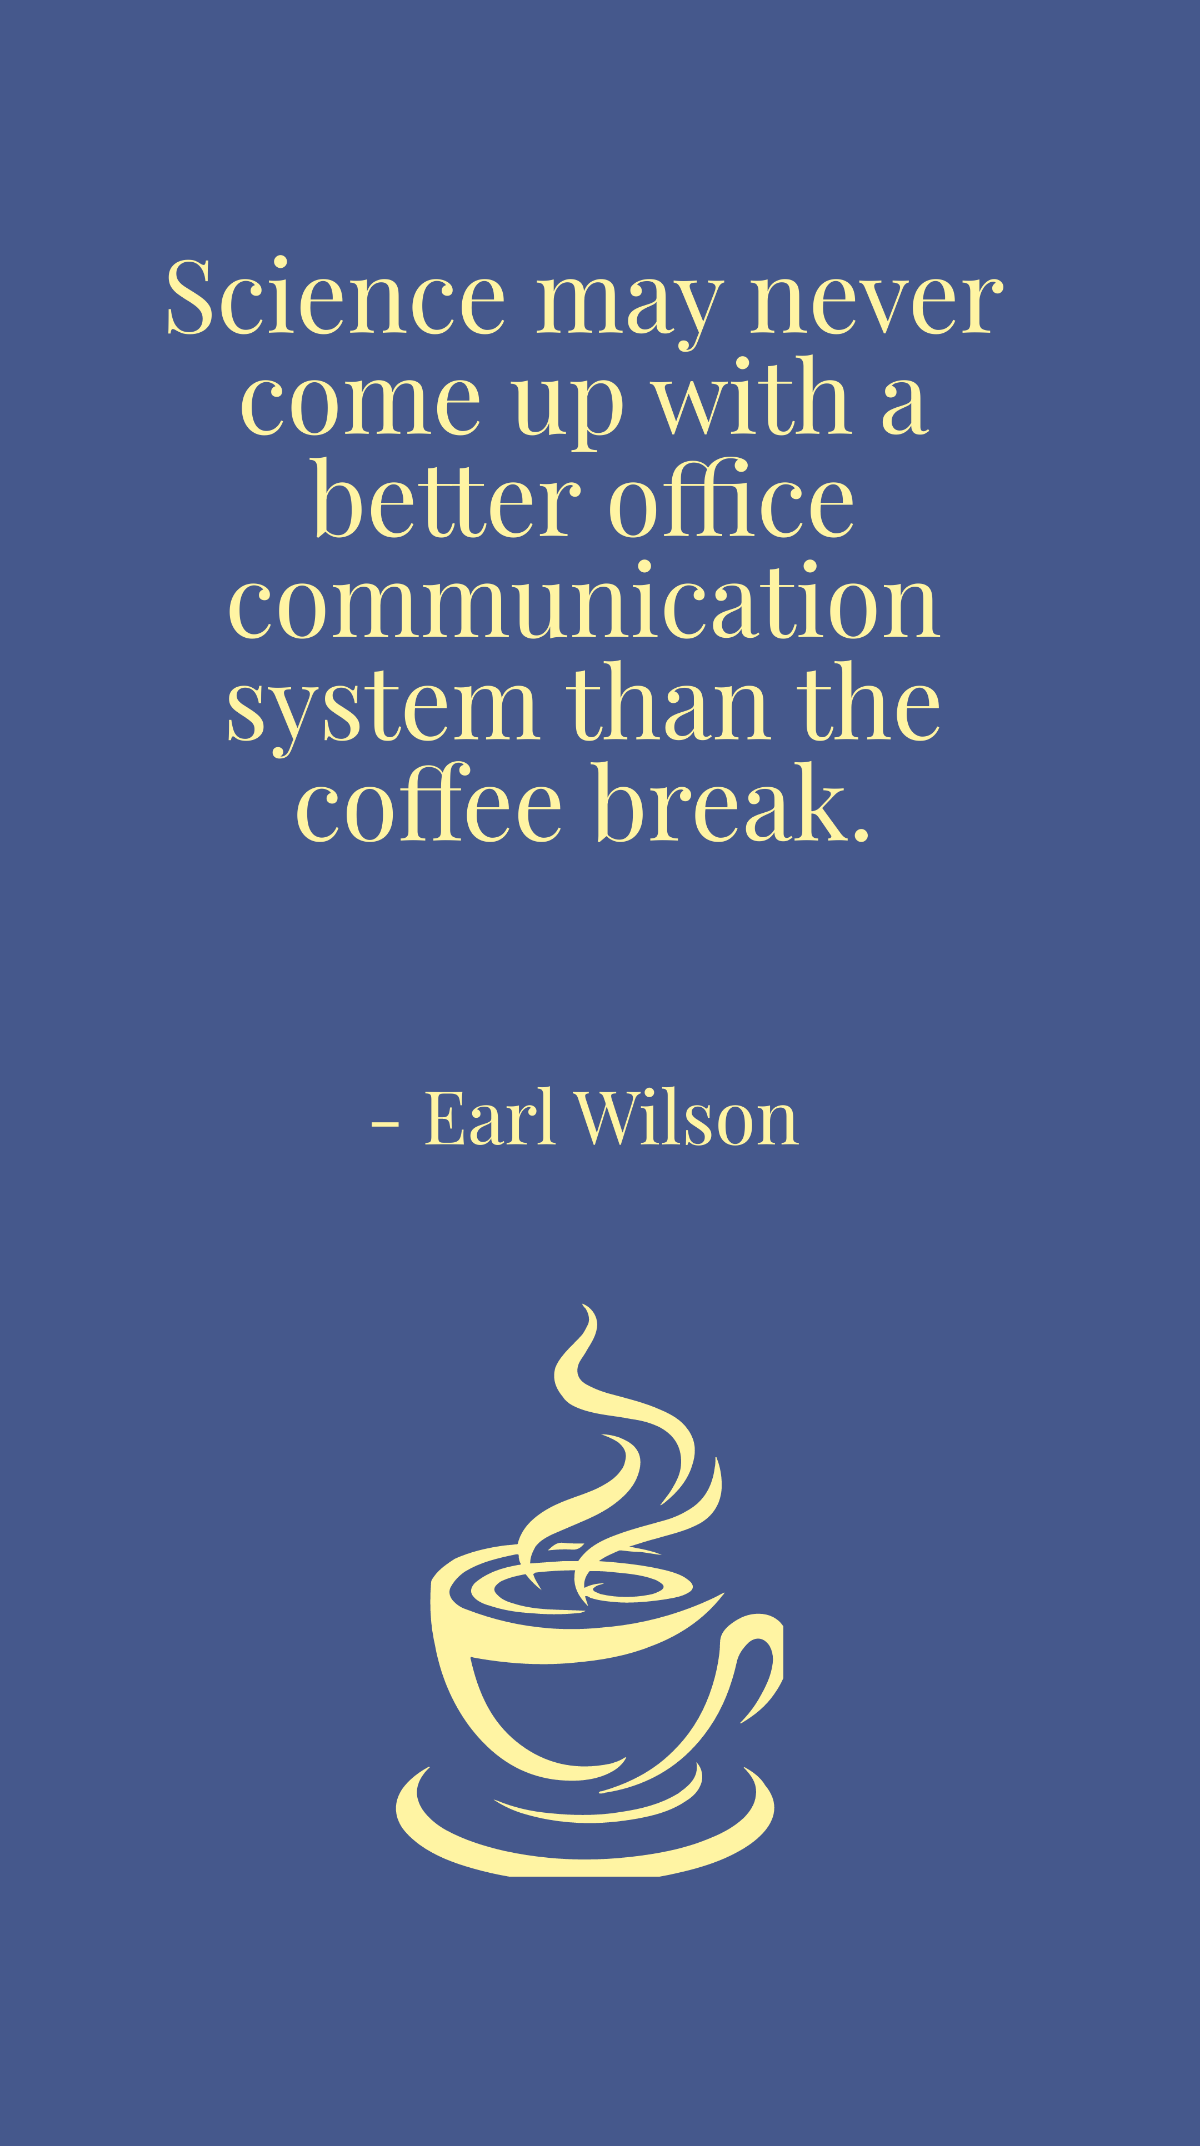 Earl Wilson - Science may never come up with a better office communication system than the coffee break.